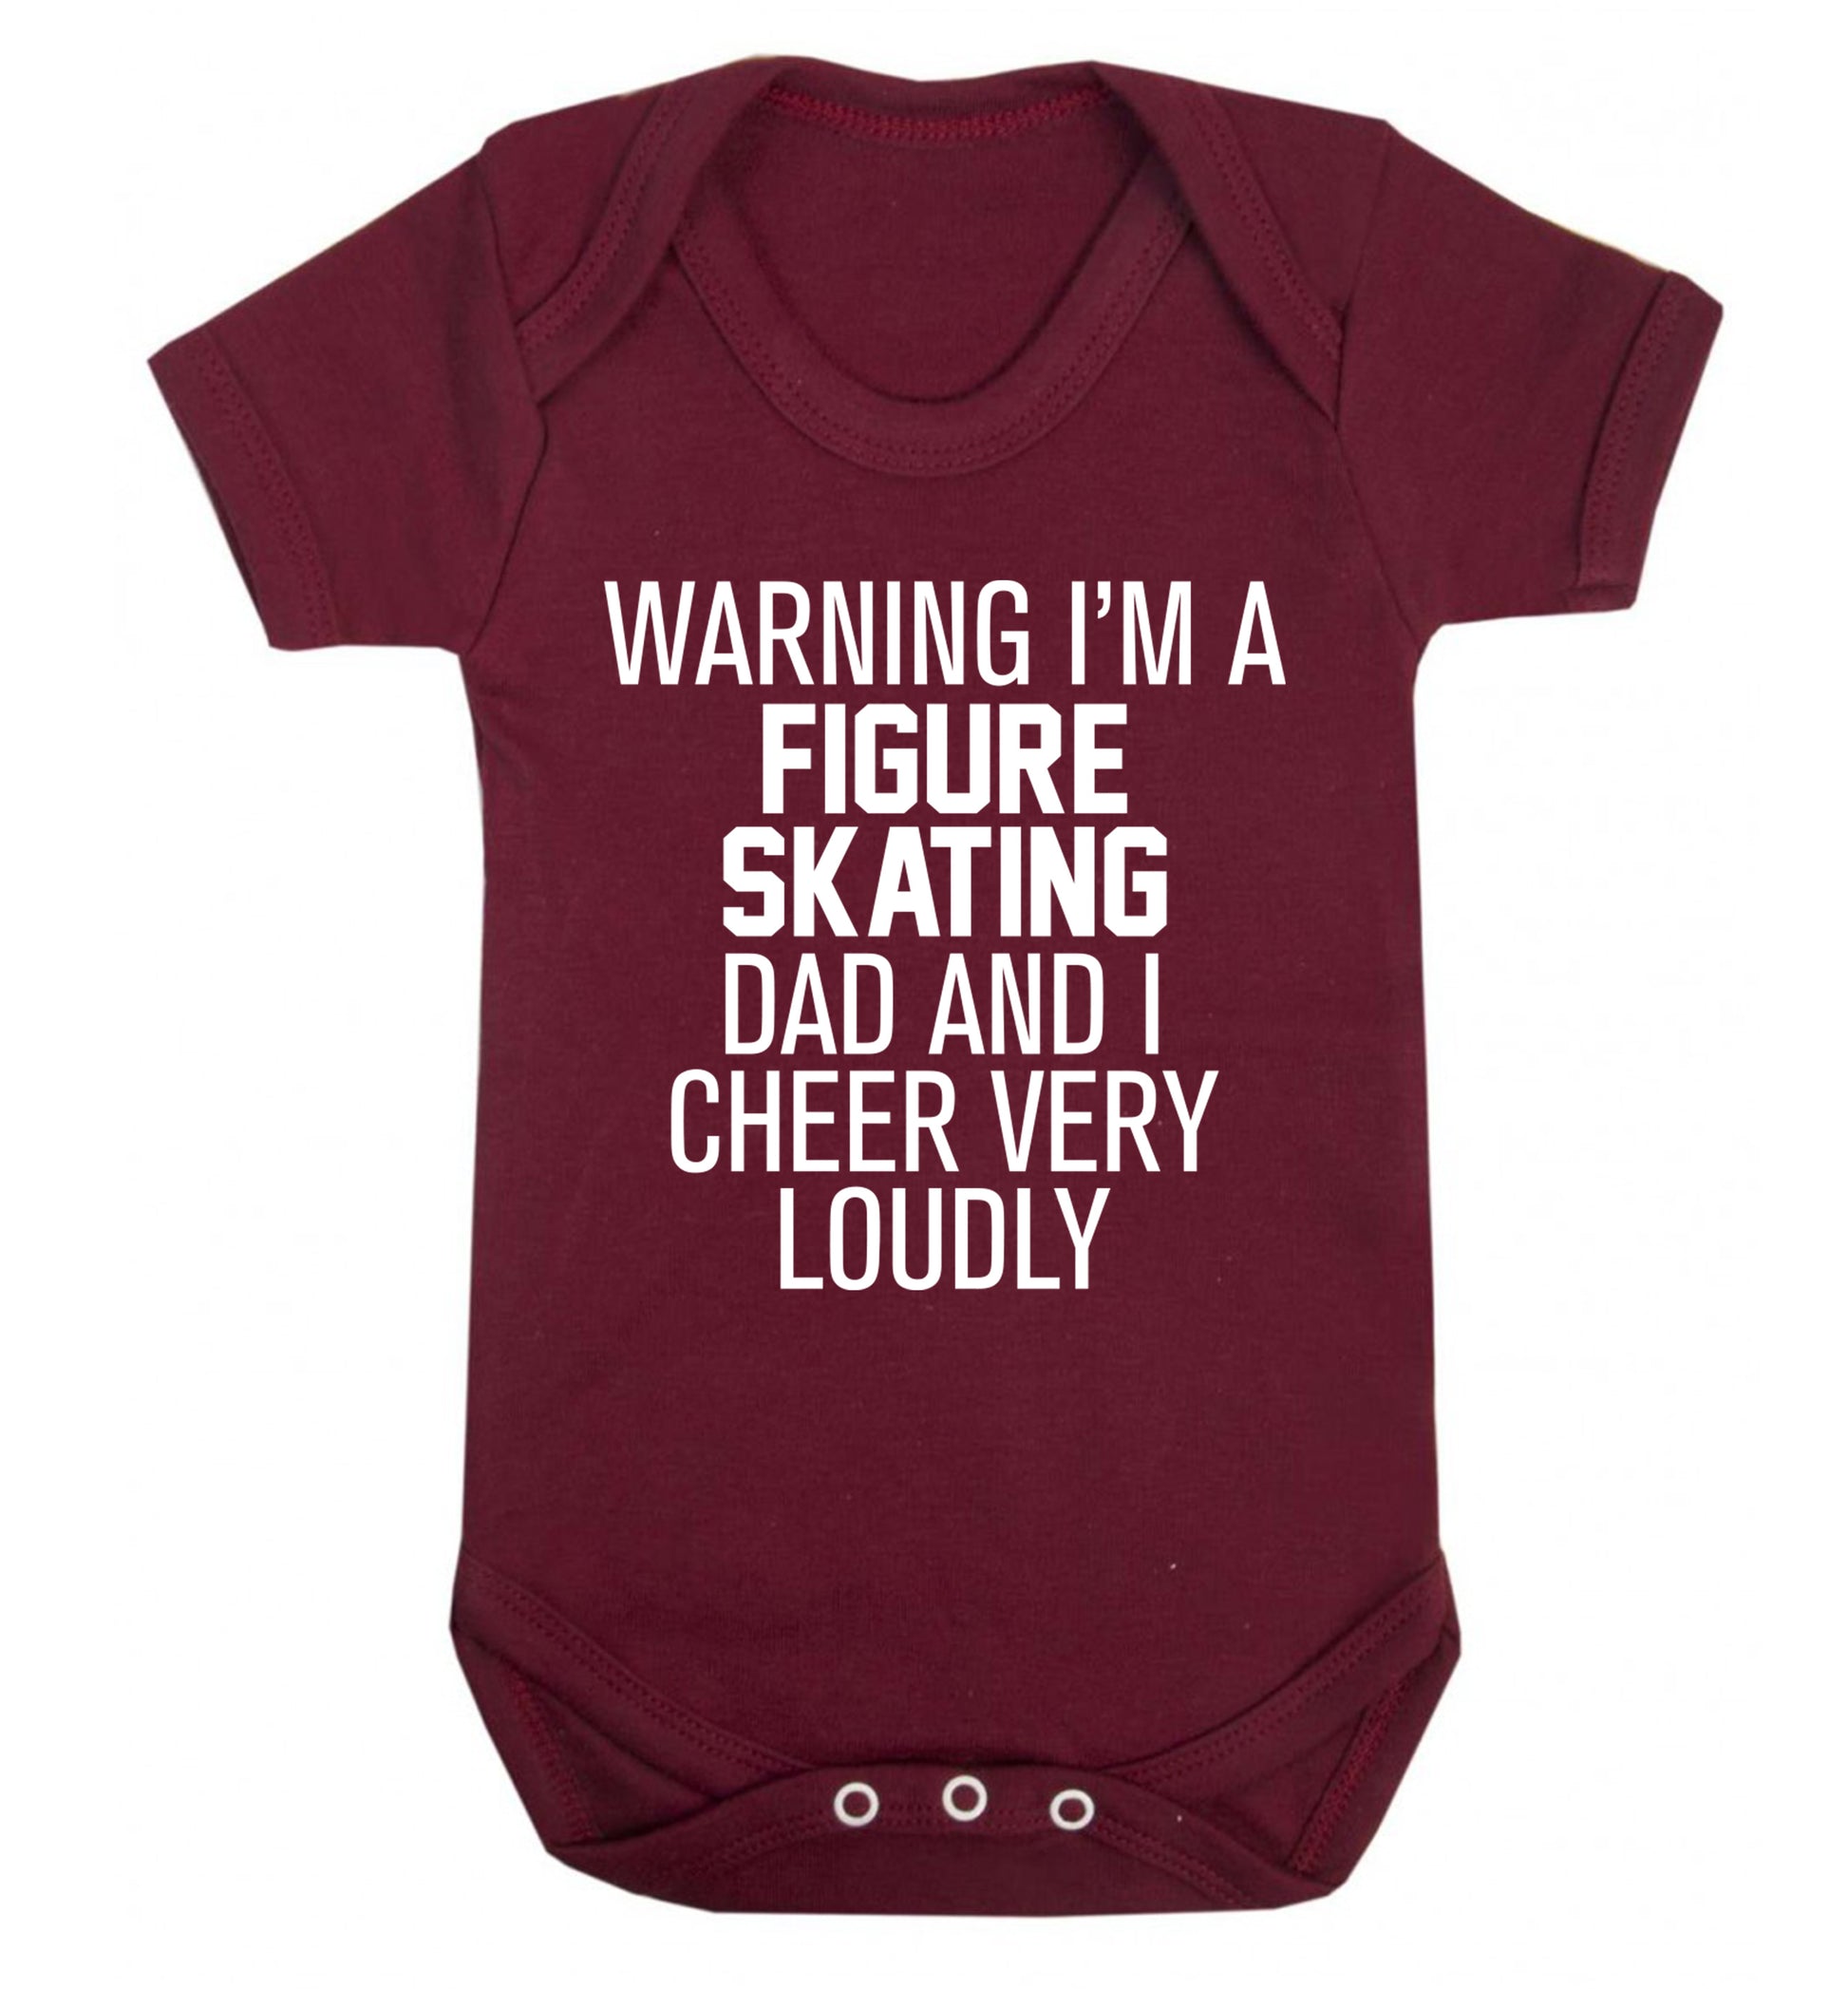 Warning I'm a figure skating dad and I cheer very loudly Baby Vest maroon 18-24 months